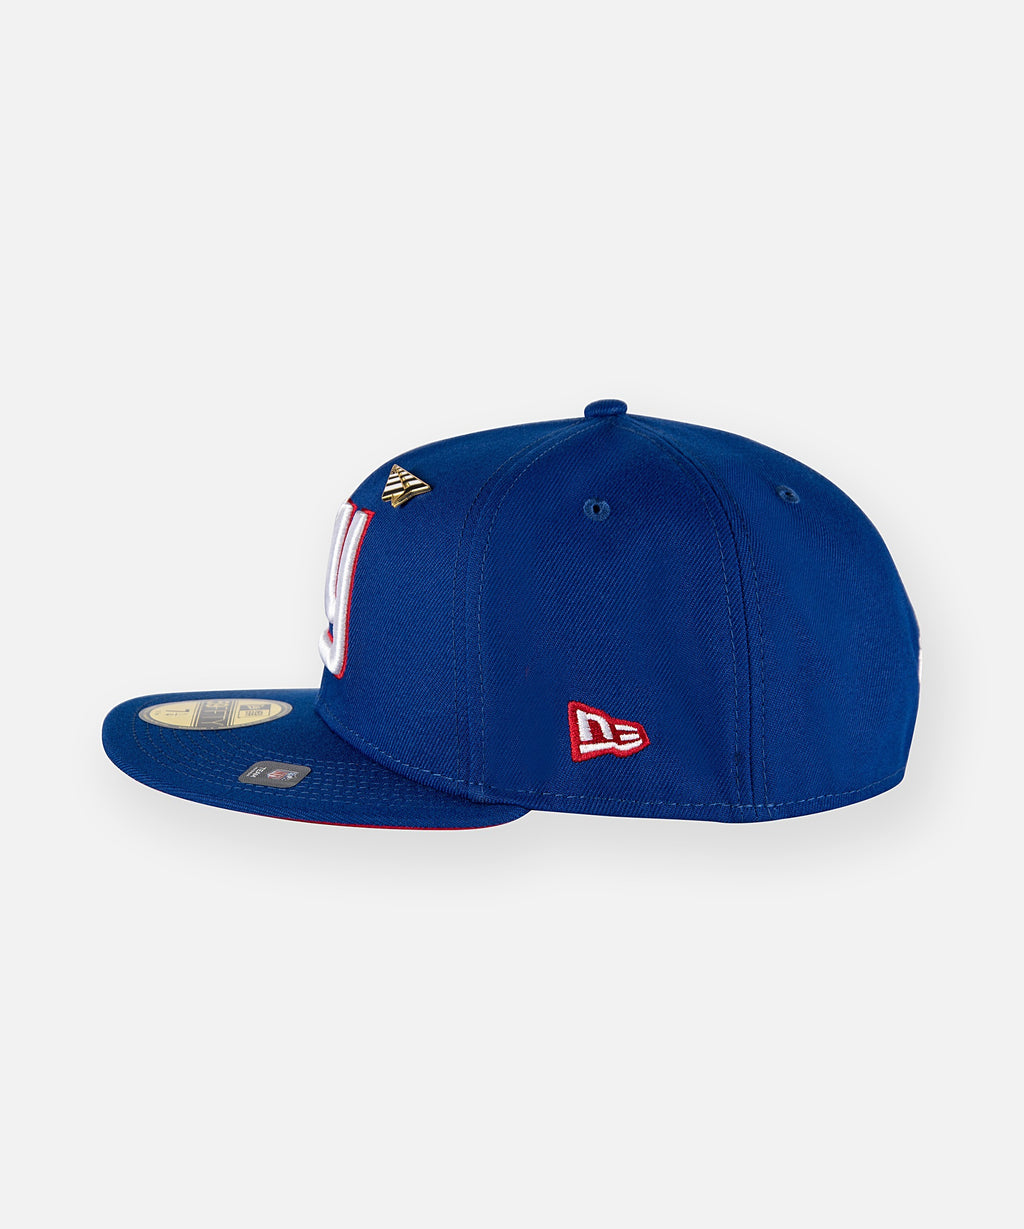 Paper Planes x New York Giants Team Color 59Fifty Fitted Hat_For Men_4